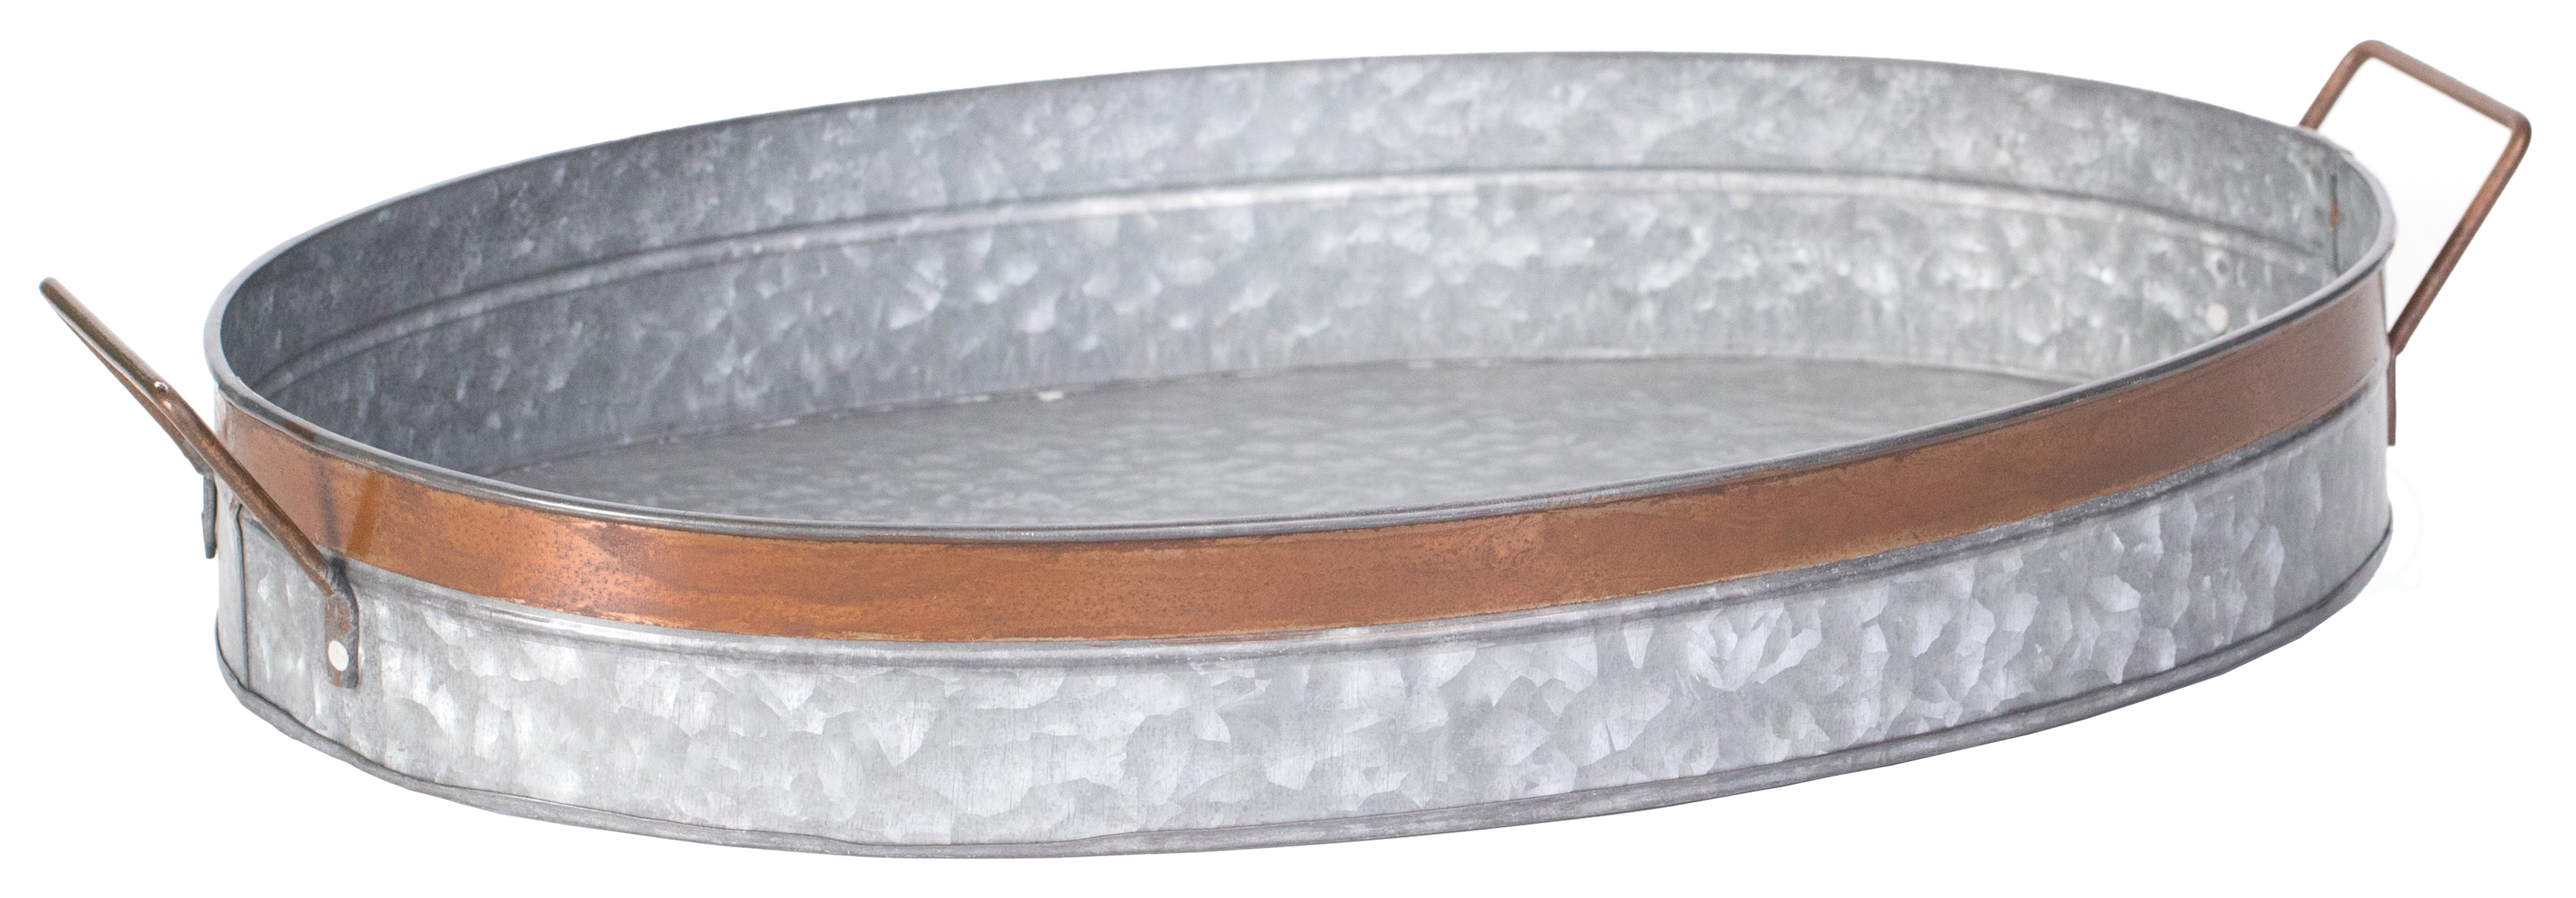 New Vintiquewise Galvanized Metal Oval Rustic Serving Tray With Handles